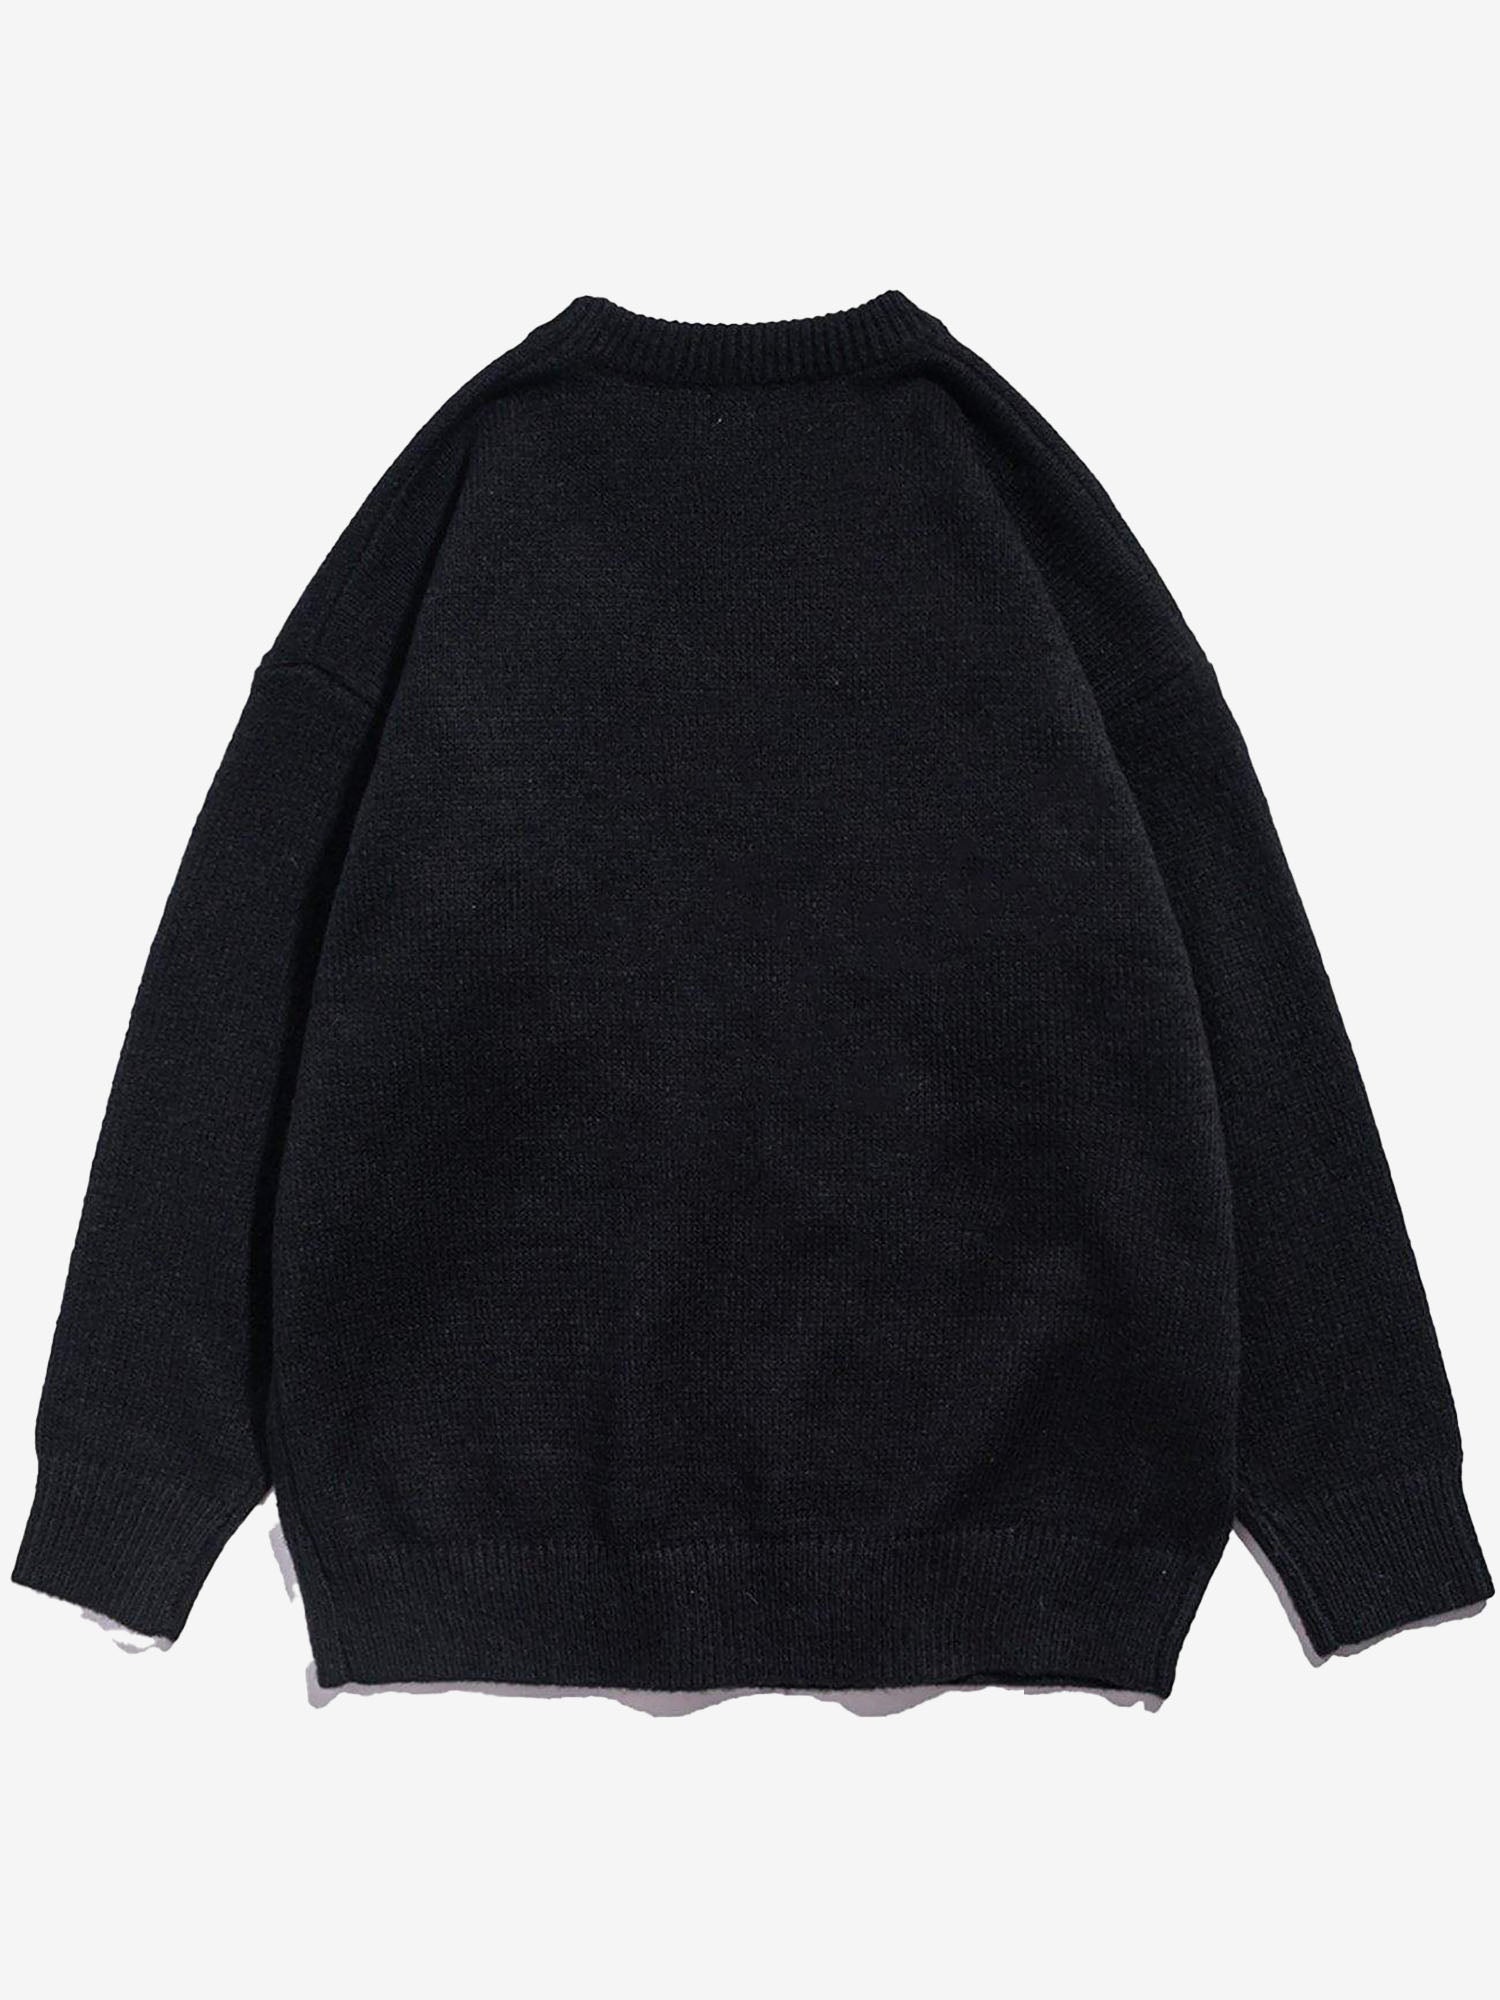 JUSTNOTAG Letter Flocking Knitted Sweater